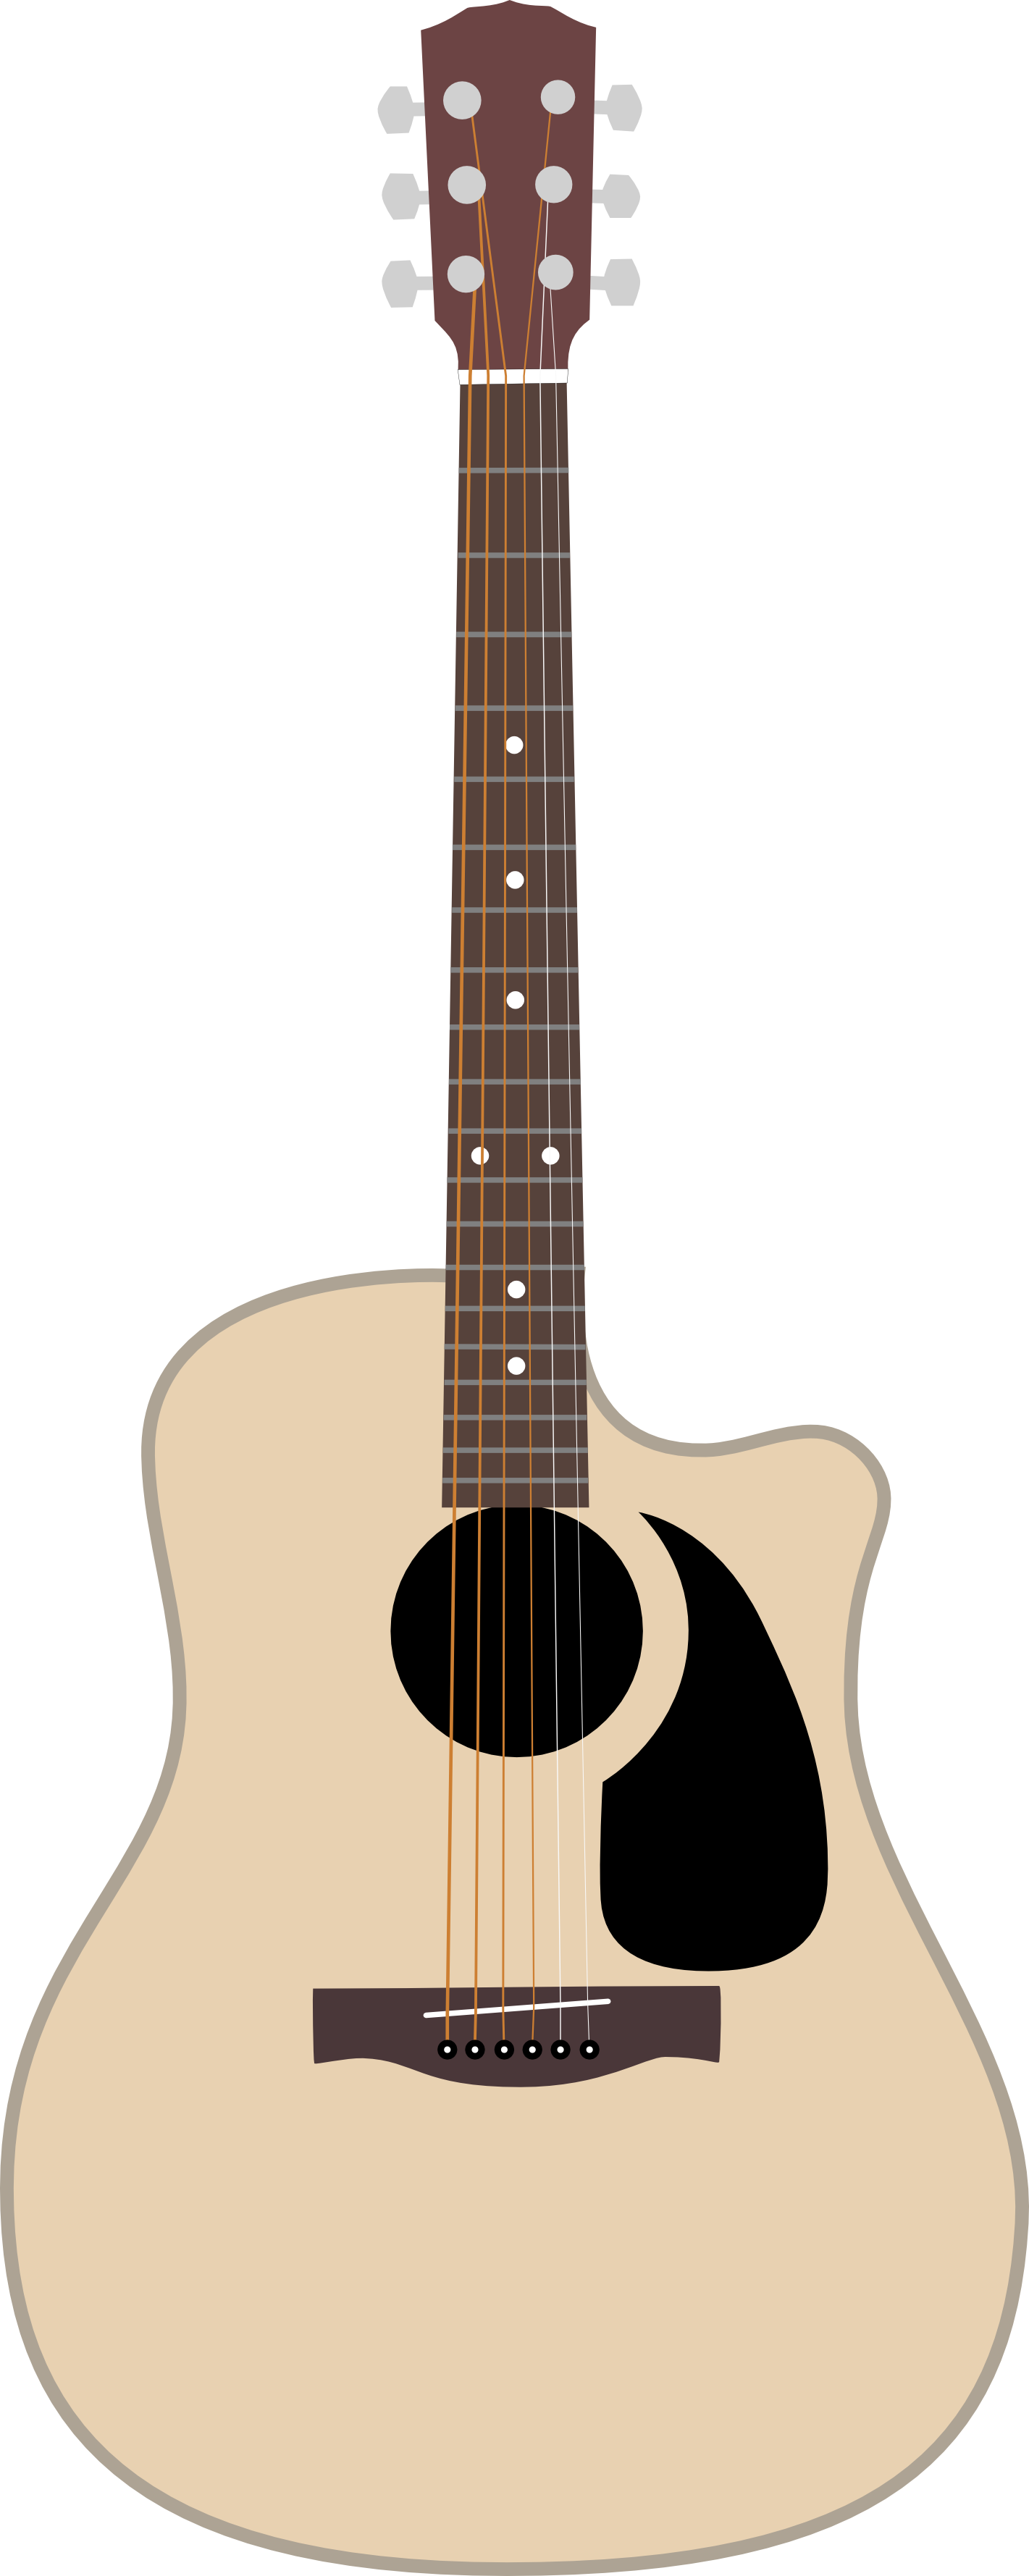 Fender Cd 100ce Acoustic Guitar By Shimmerscroll On - Fender Fa 135 Ce (1421x3558)